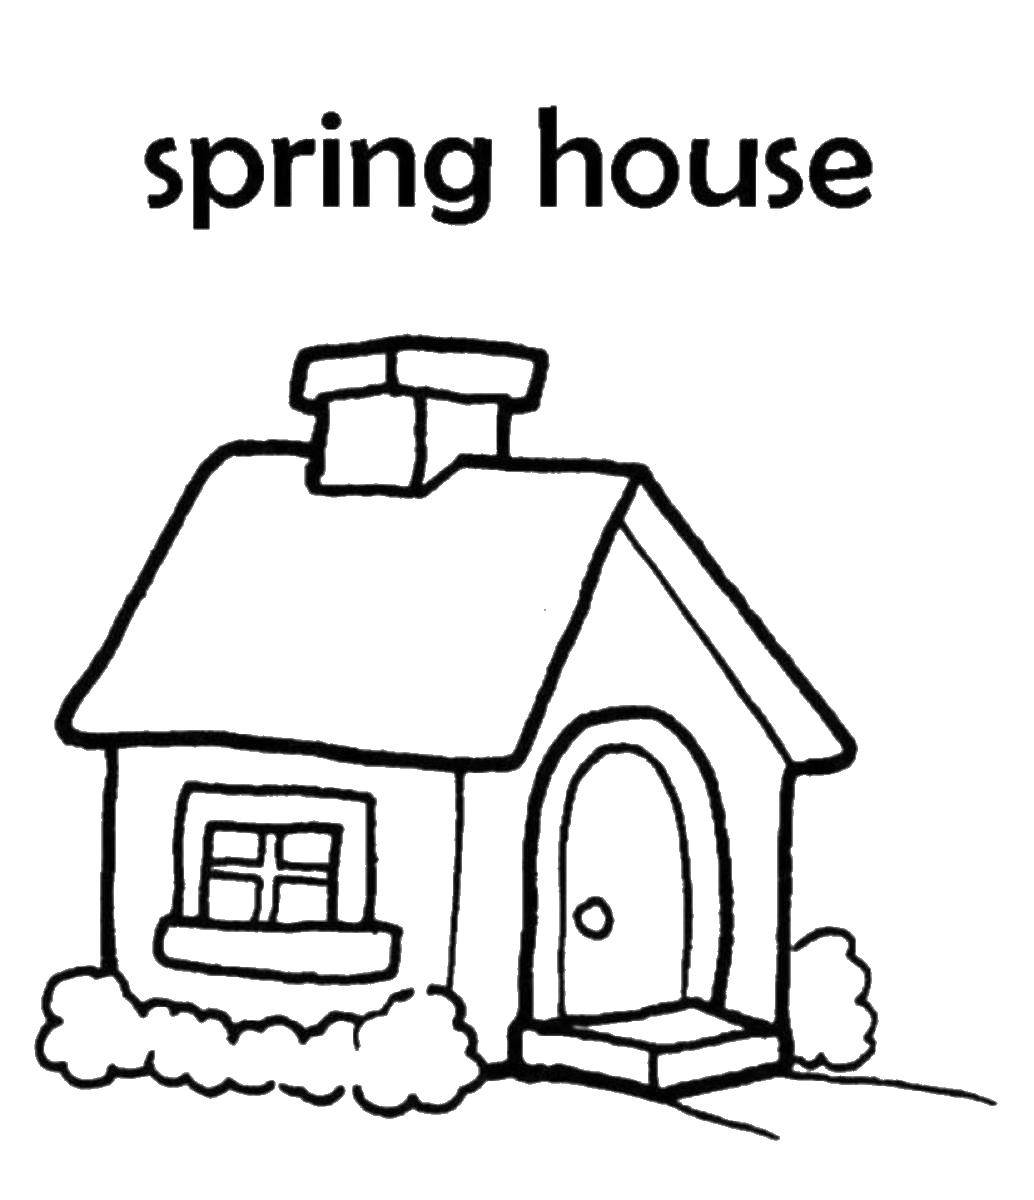 Coloring Spring house. Category Coloring house. Tags:  home, house.